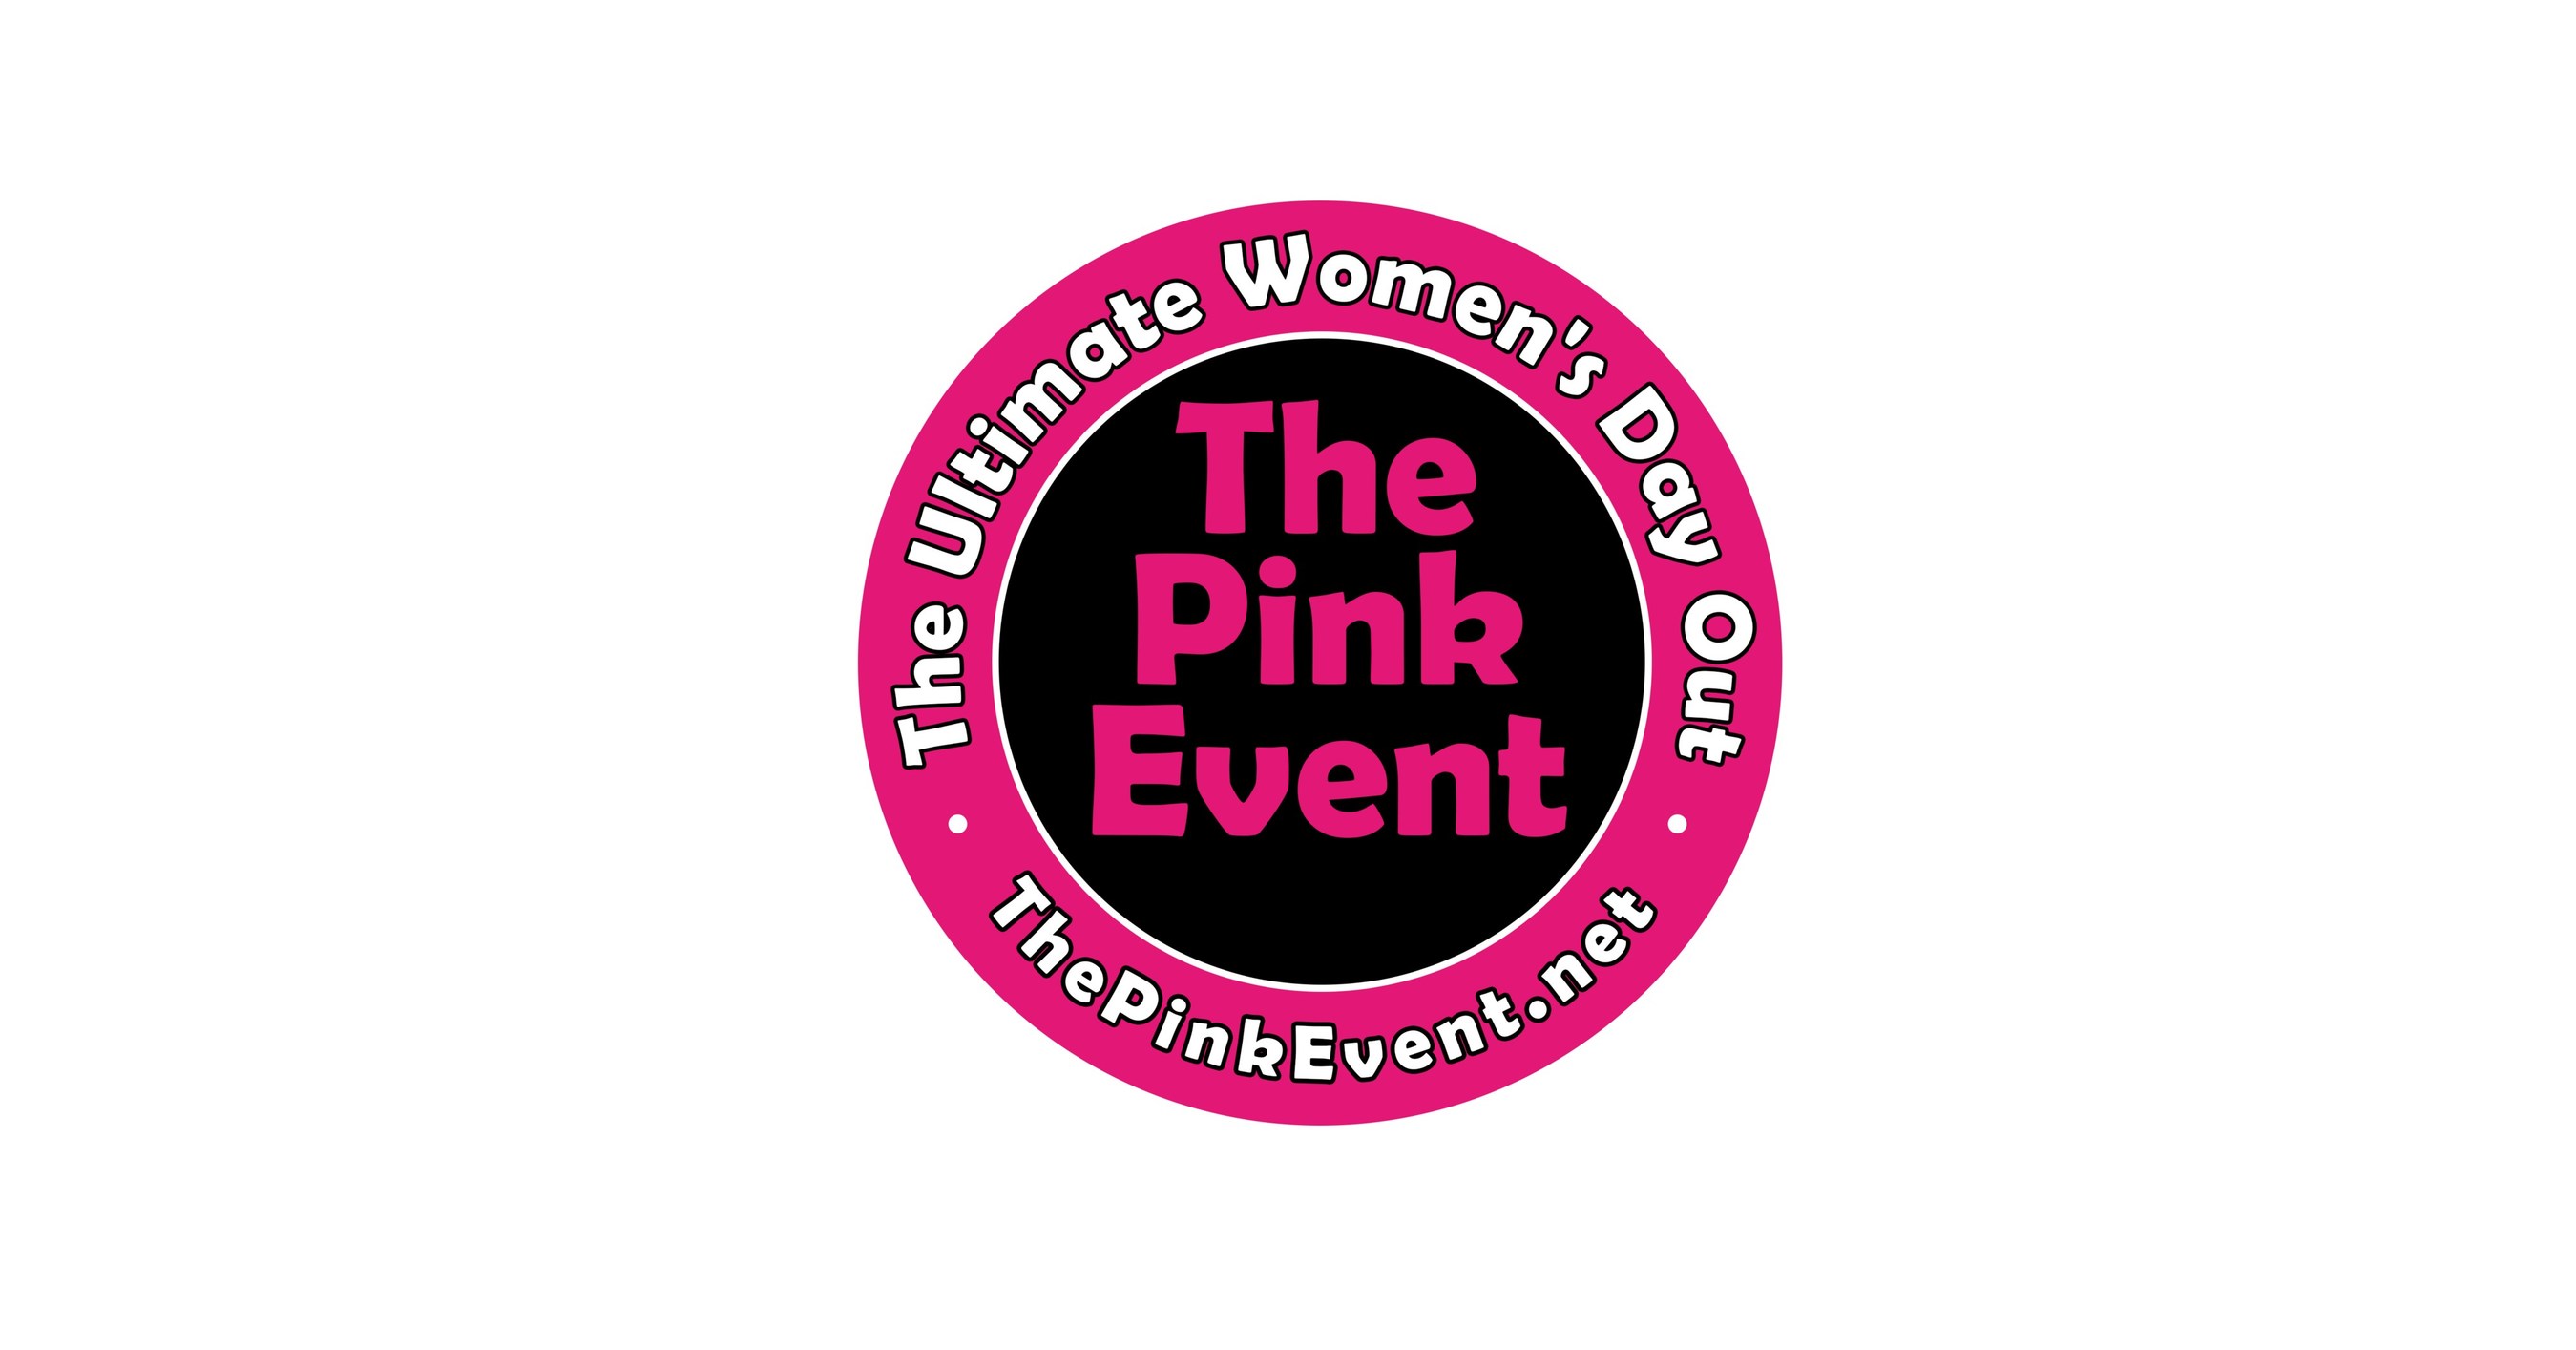 Diamond Event Services, Inc. to Host Its 8th Annual Women's Expo The